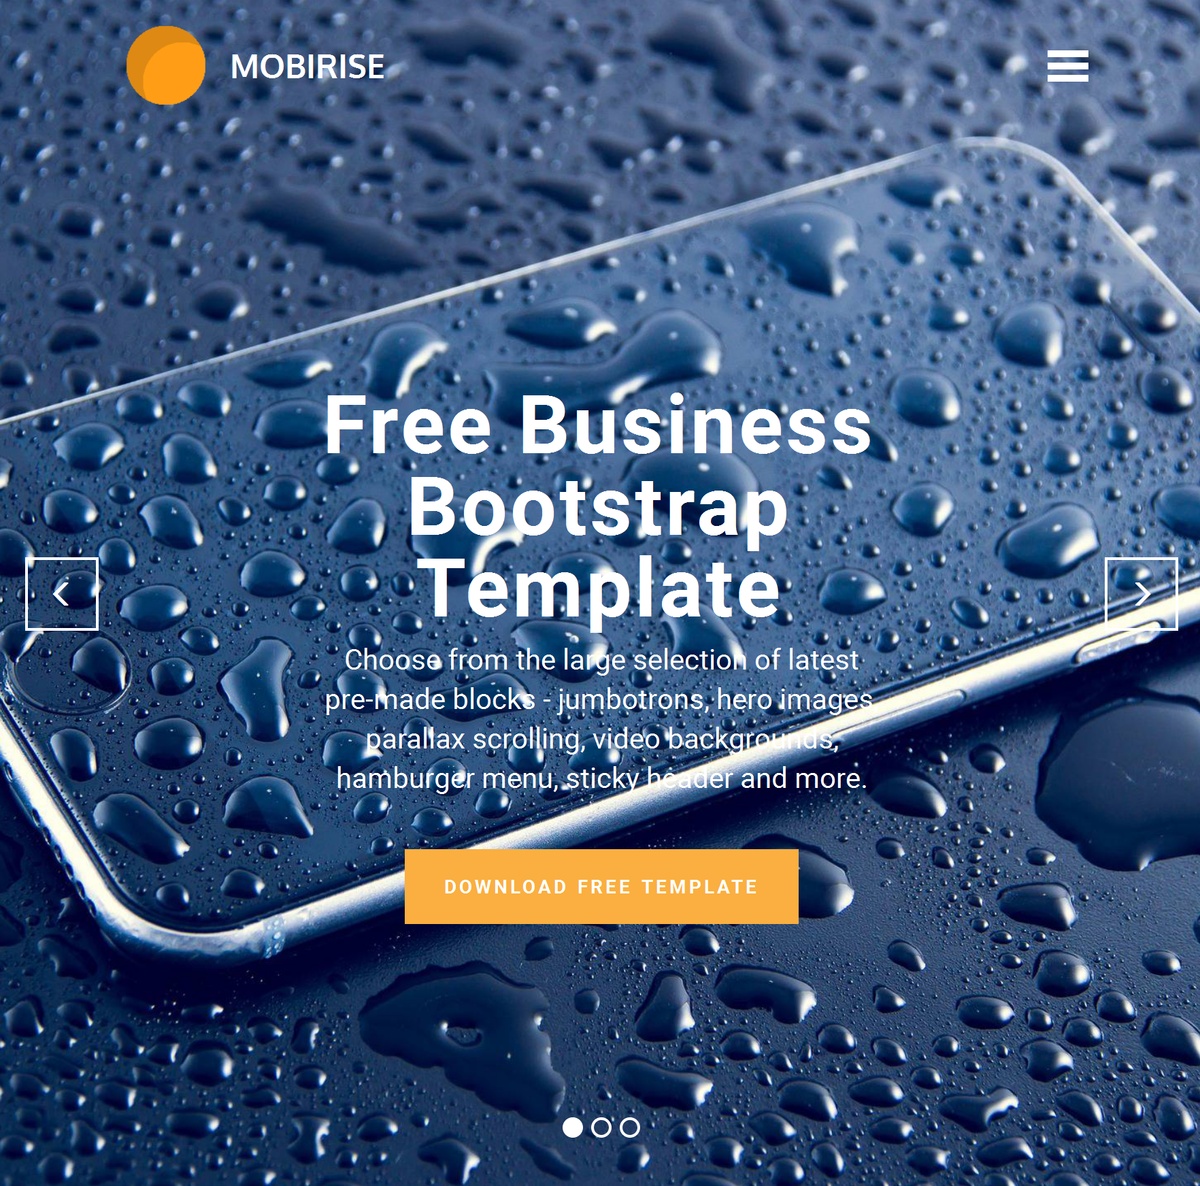 Mobile Responsive Website Templates Themes Extensions